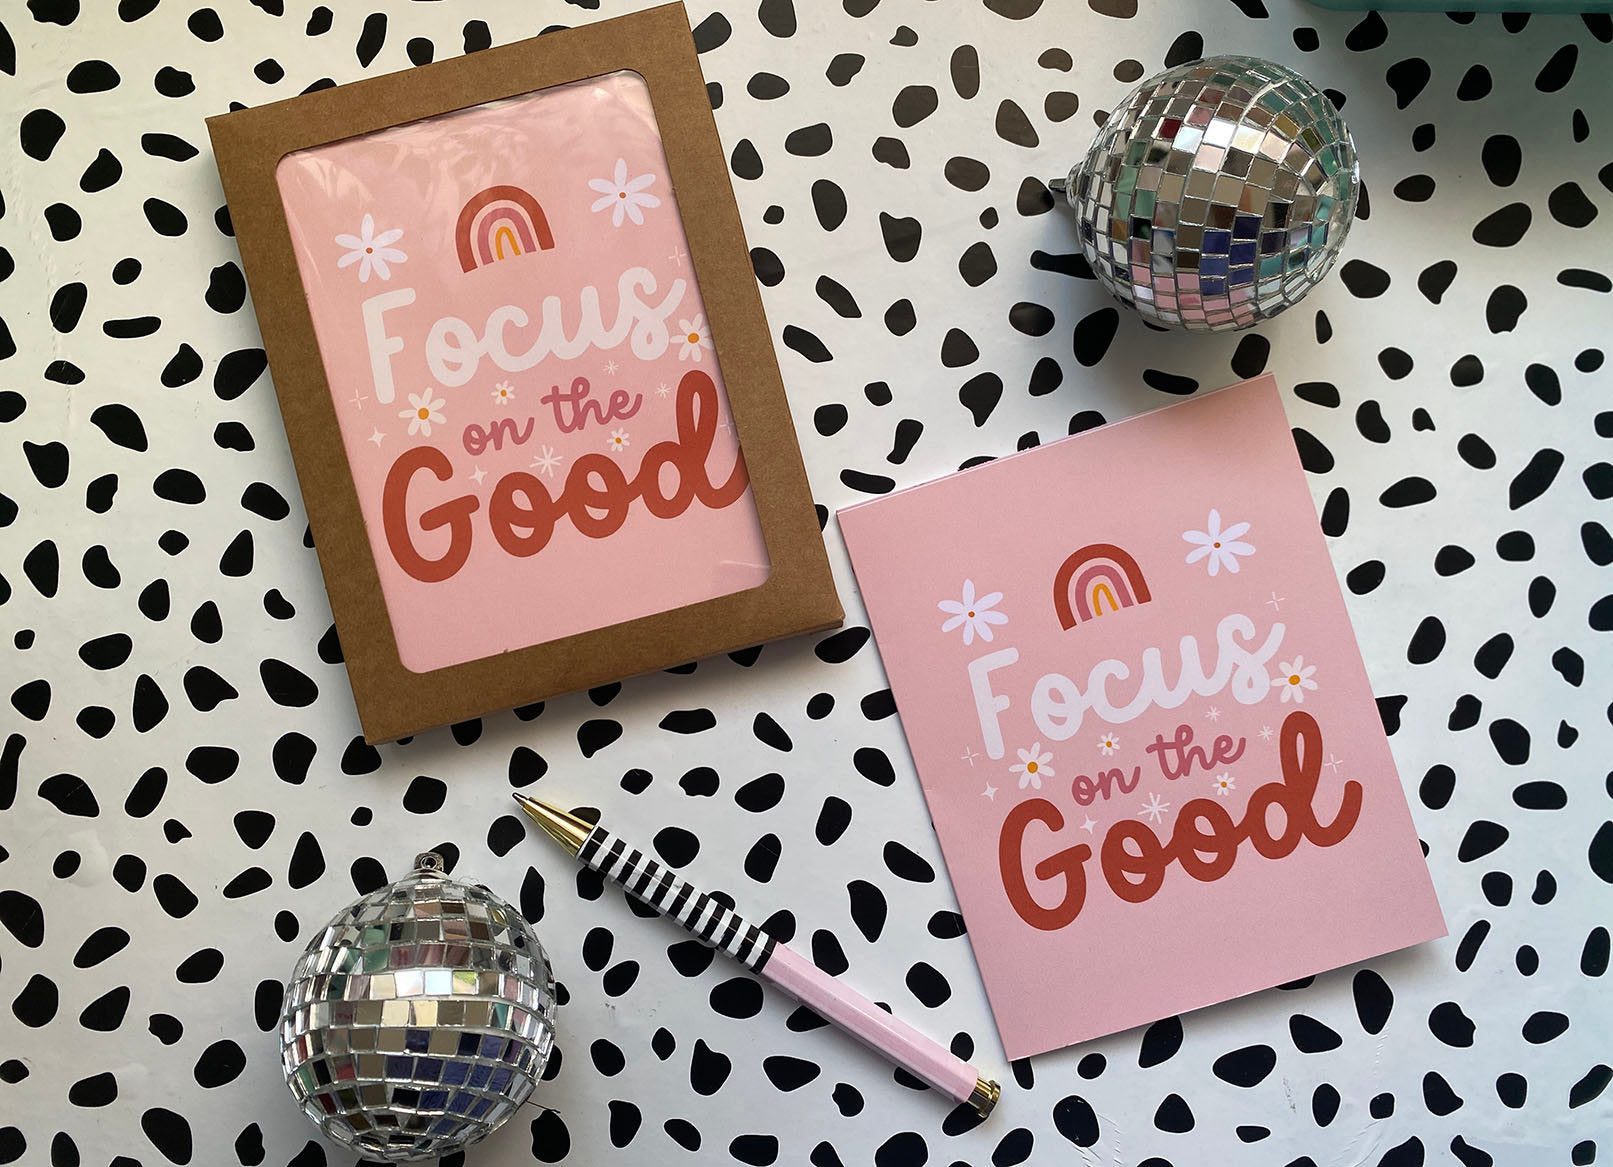 Focus On The Good, Motivation, Greeting Cards, Positivity, Stationery, Galentines, Good Vibes, Uplifting Card, Encouragement